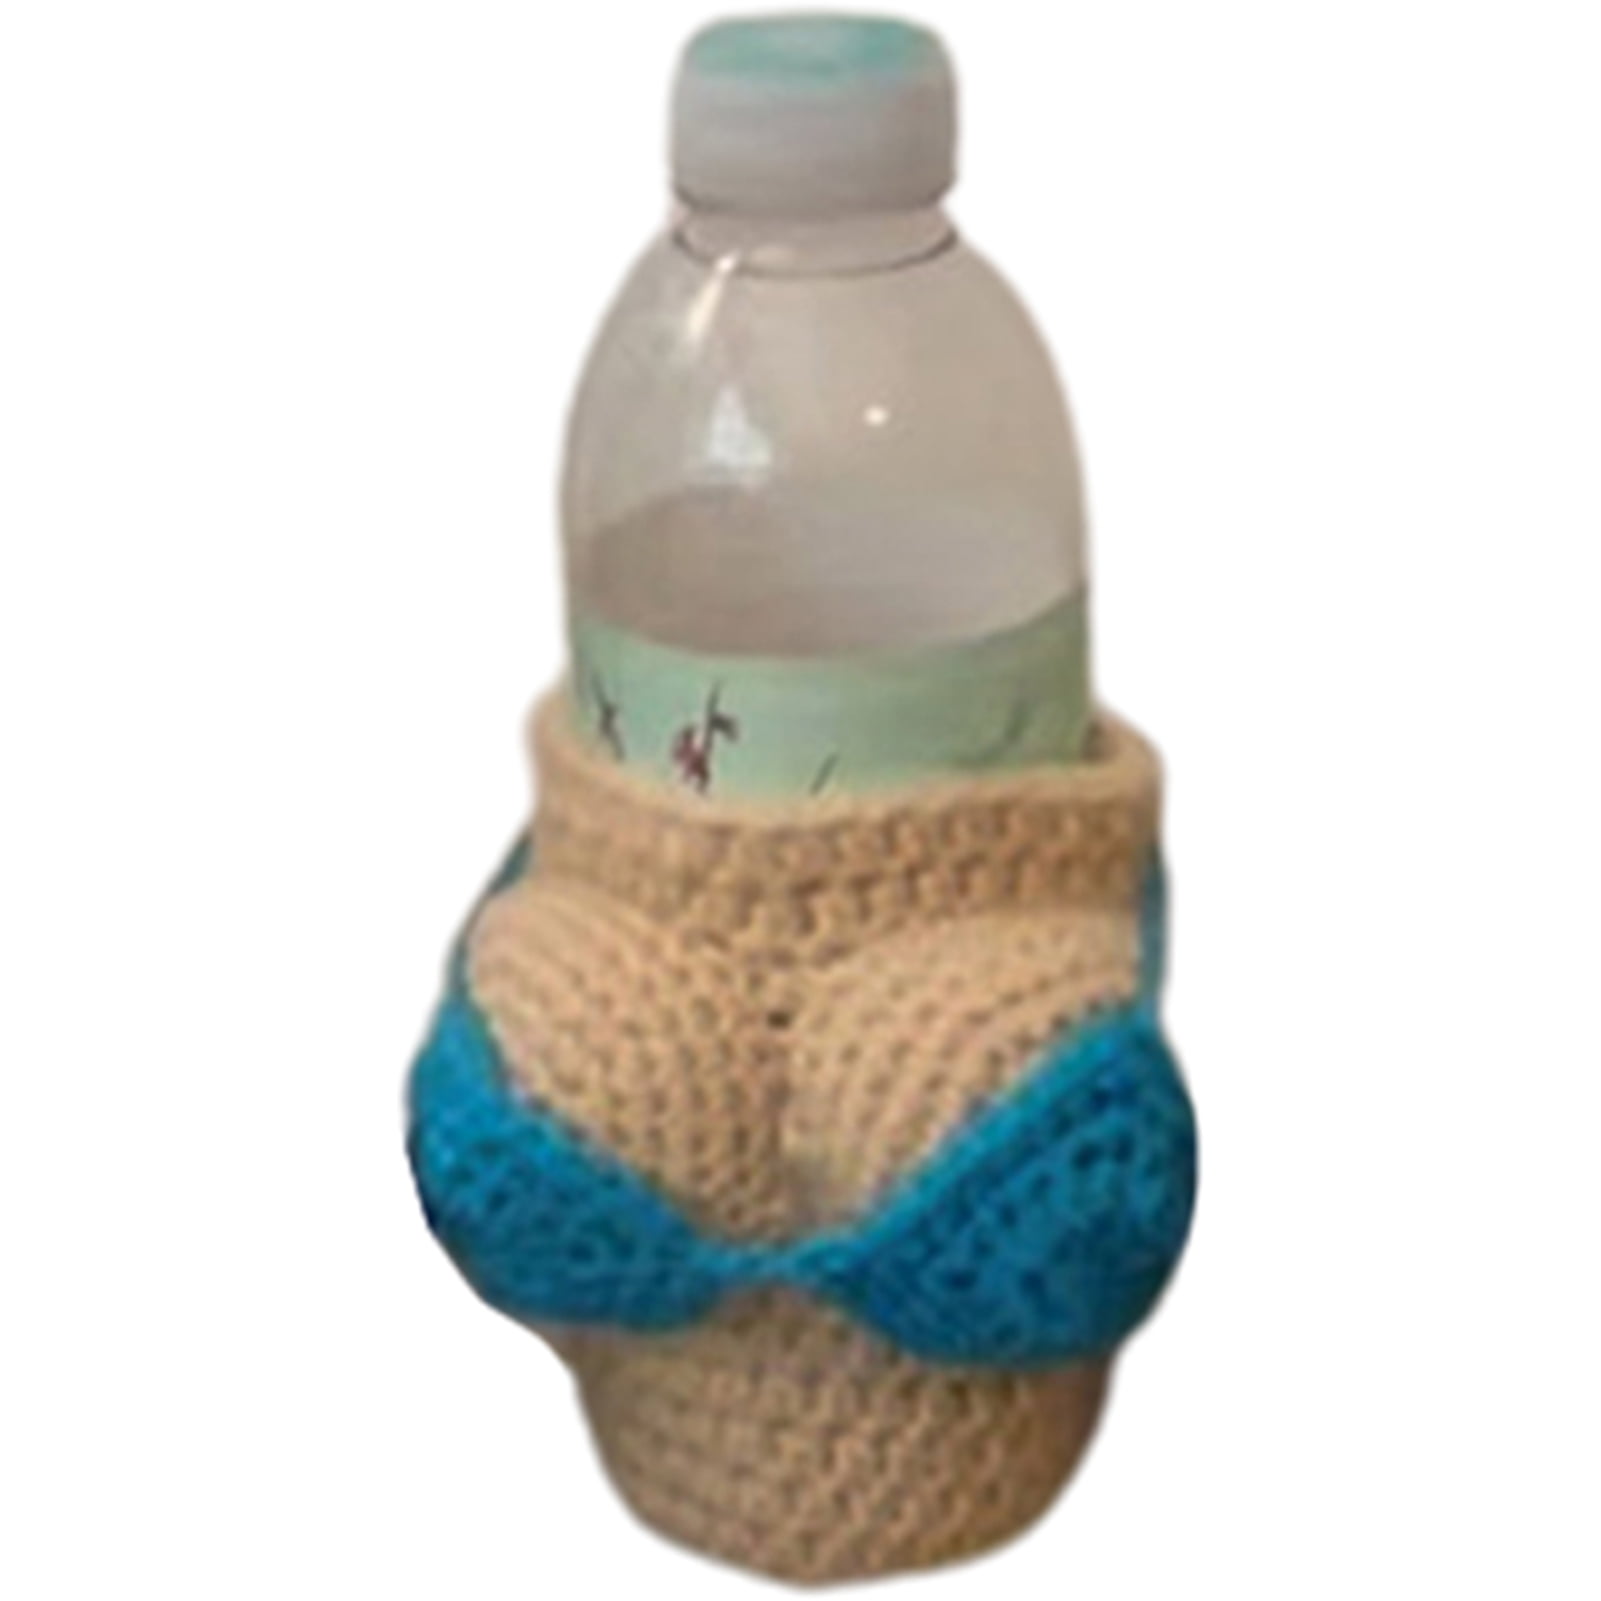 New Bottle Cozy Beer Covers Big Boobs Design Soft Knitted Bottle